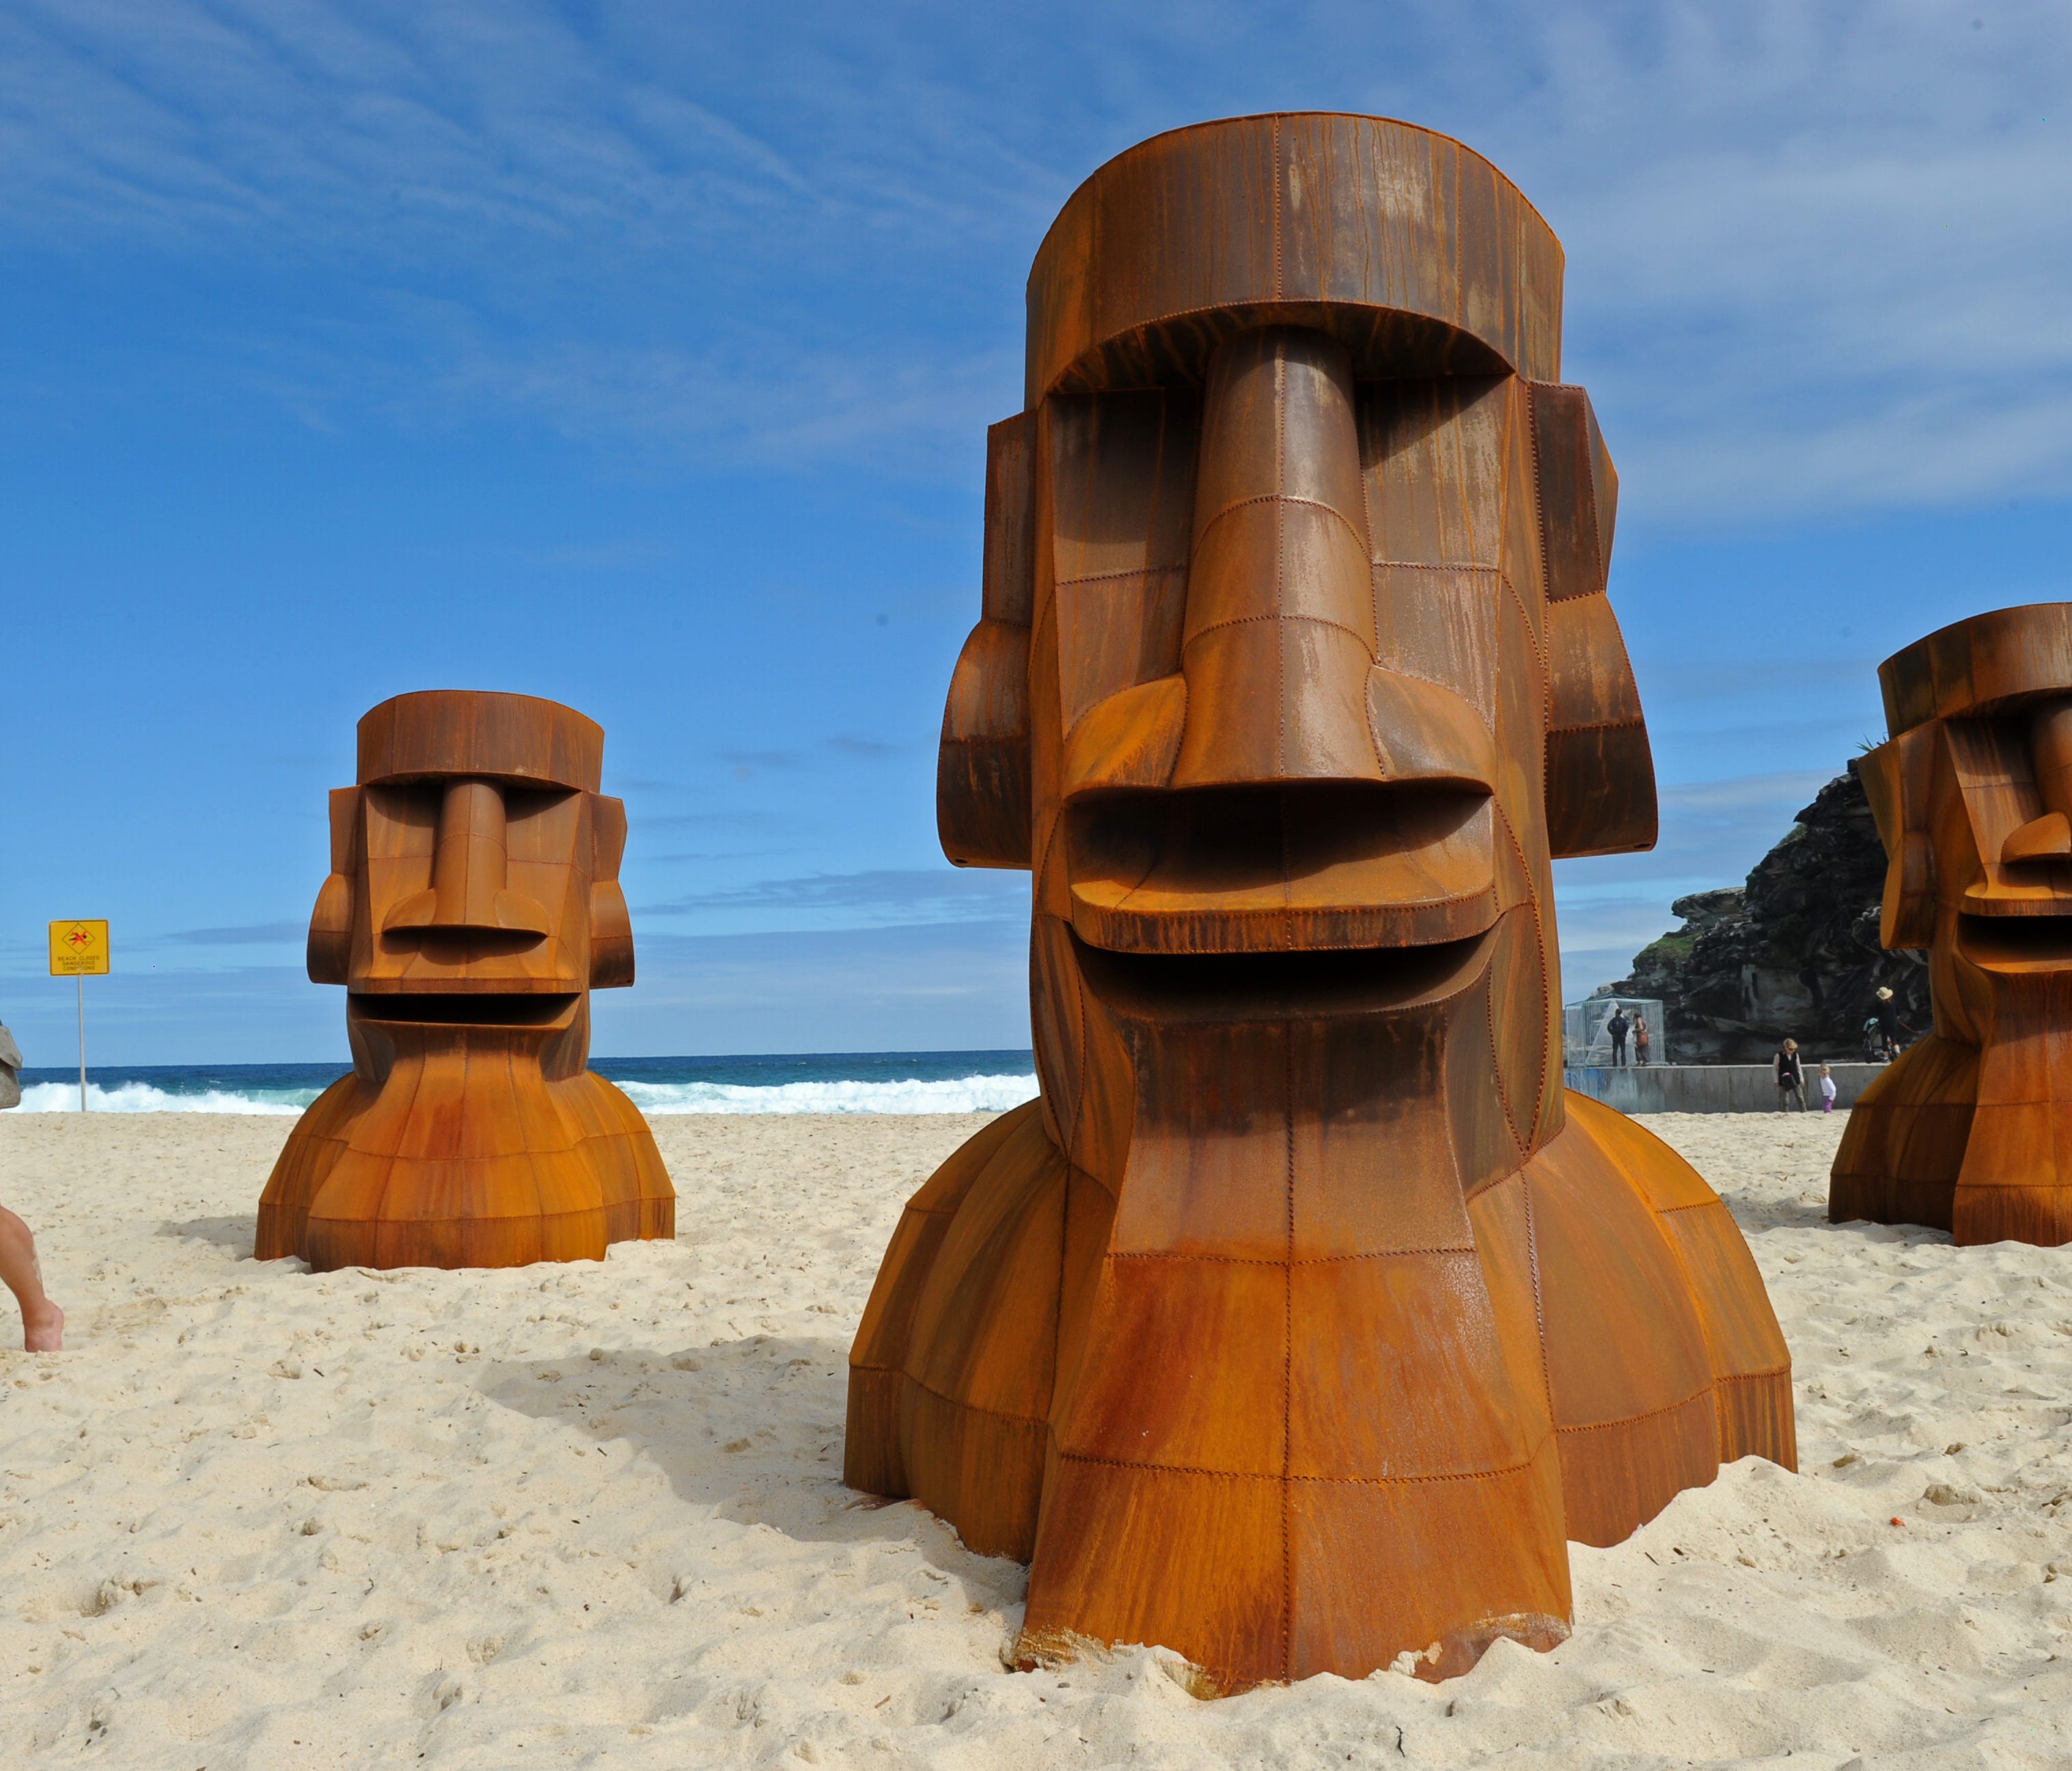 October: Sculptures by the Sea. Visit Sydney in late spring for Bondi Beach's famous art installation, Sculptures by the Sea. It's the world's largest, free public sculpture exhibition and features over 100 works by both local and international artis